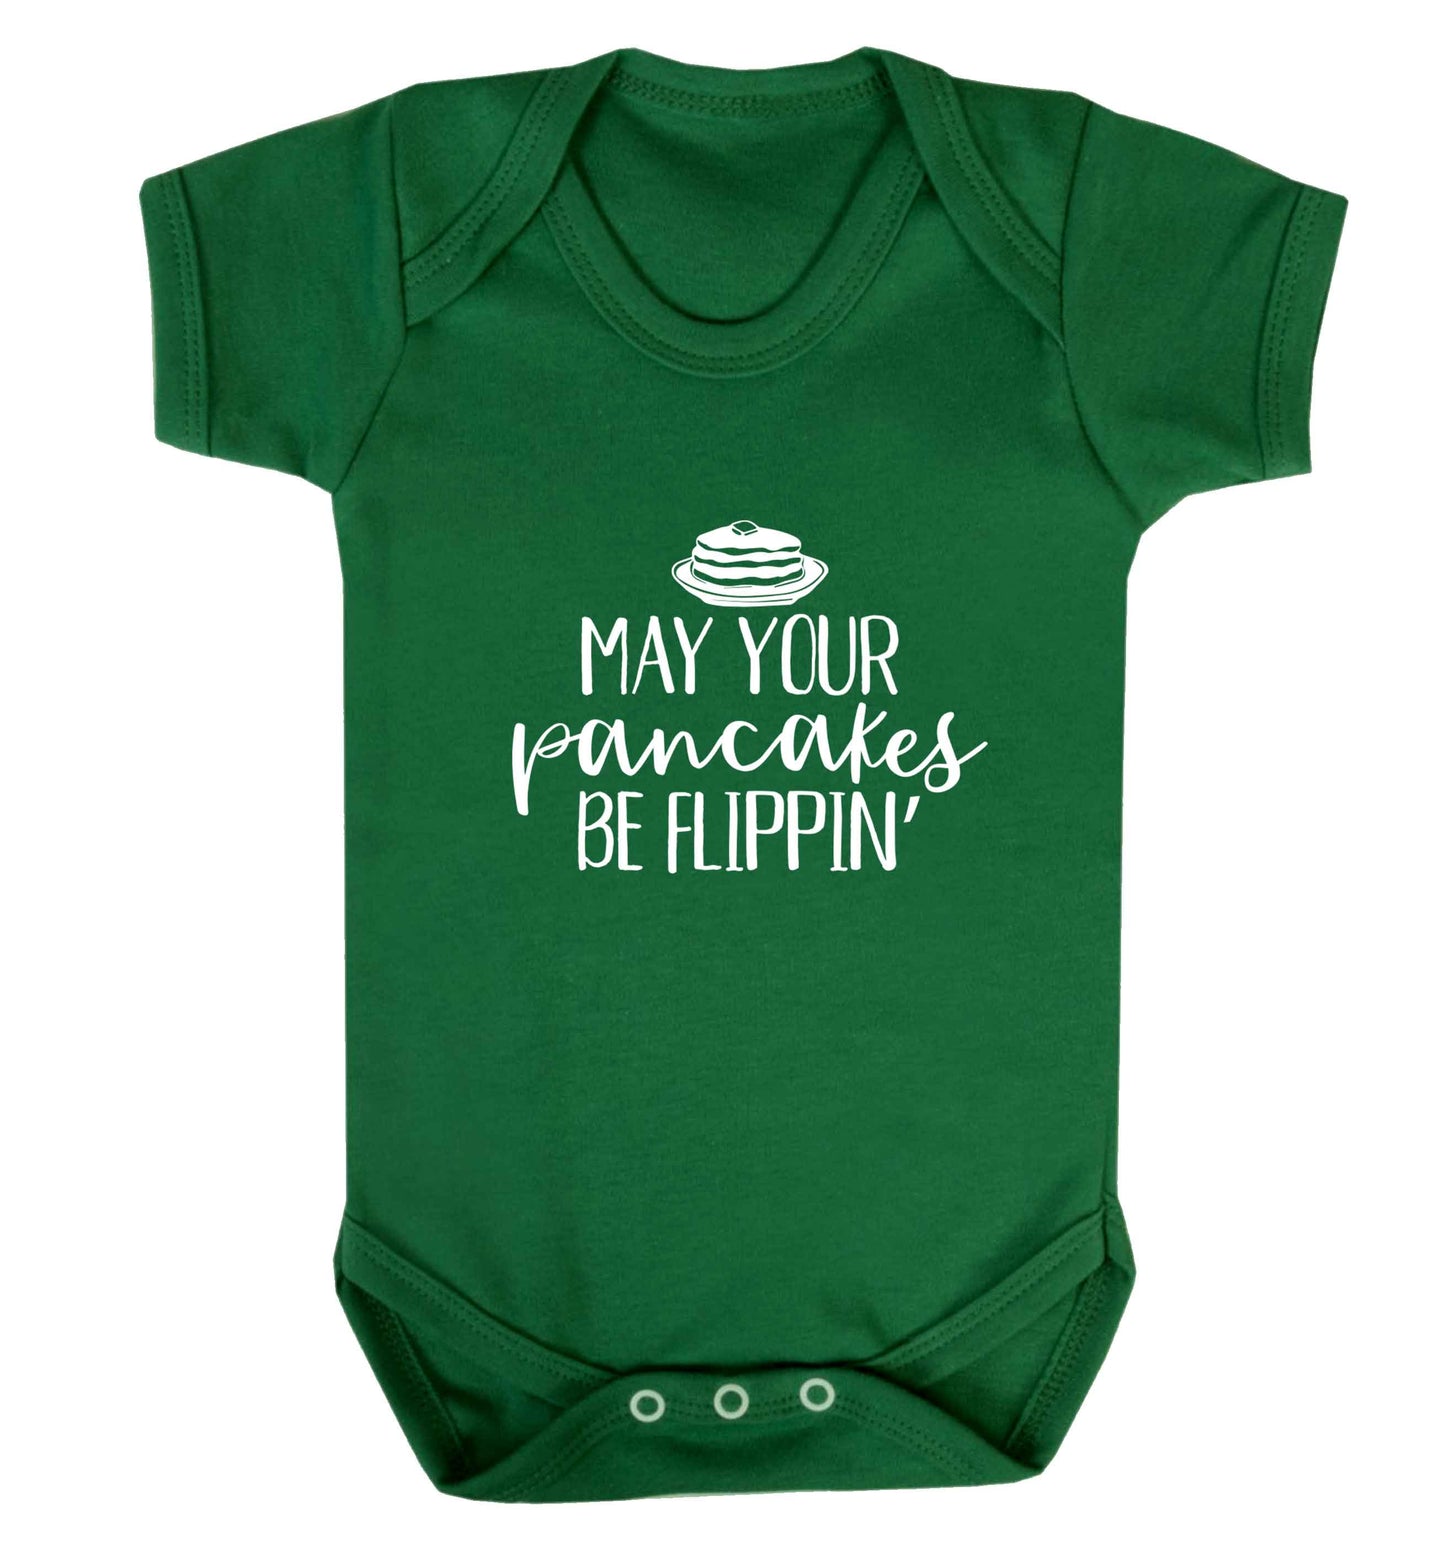 May your pancakes be flippin' baby vest green 18-24 months